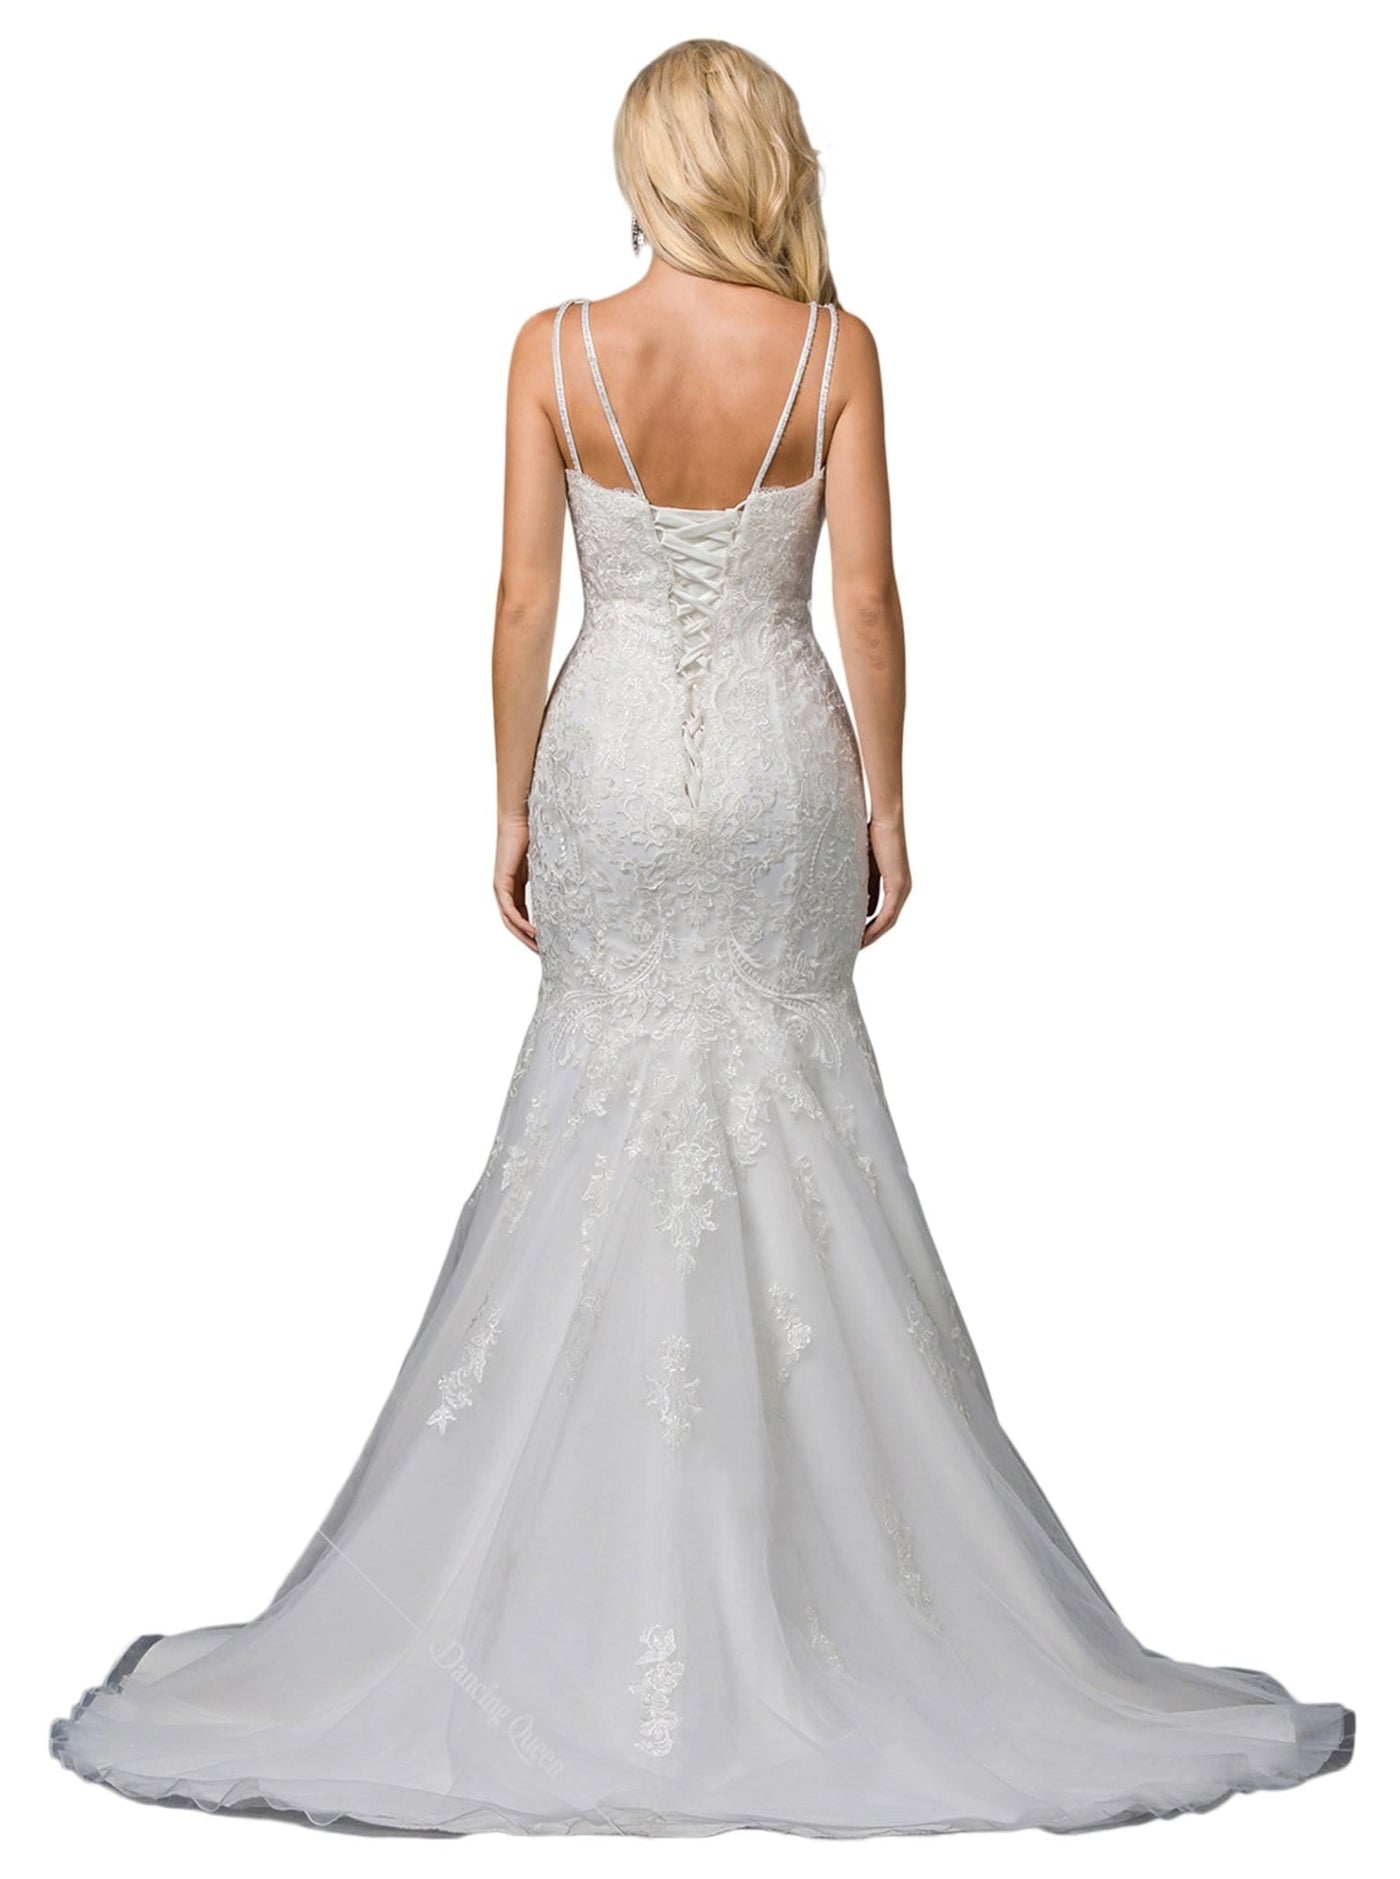 Dancing Queen Bridal - 86 Embroidered Plunging V-neck Trumpet Gown Wedding Dresses